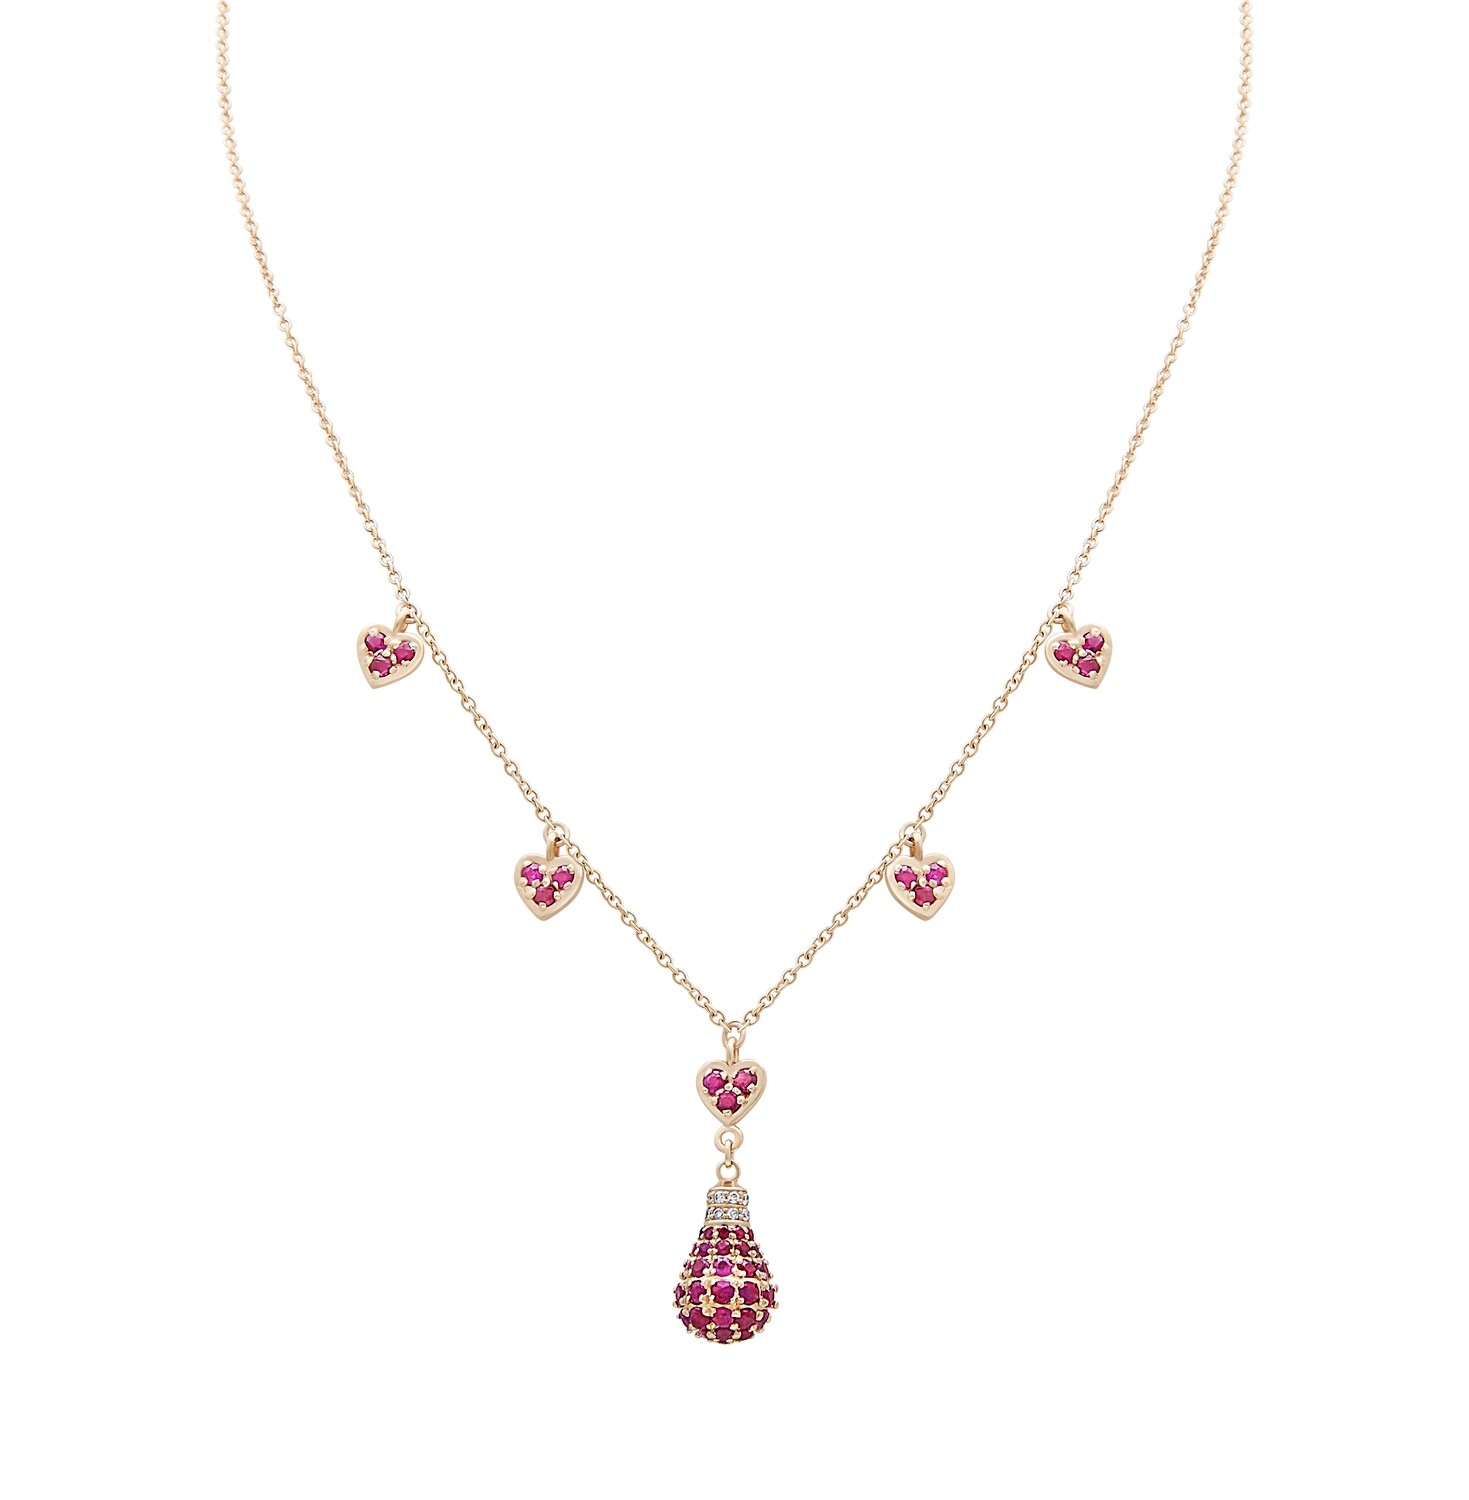 Light Diamond Necklace with Ruby Hearts